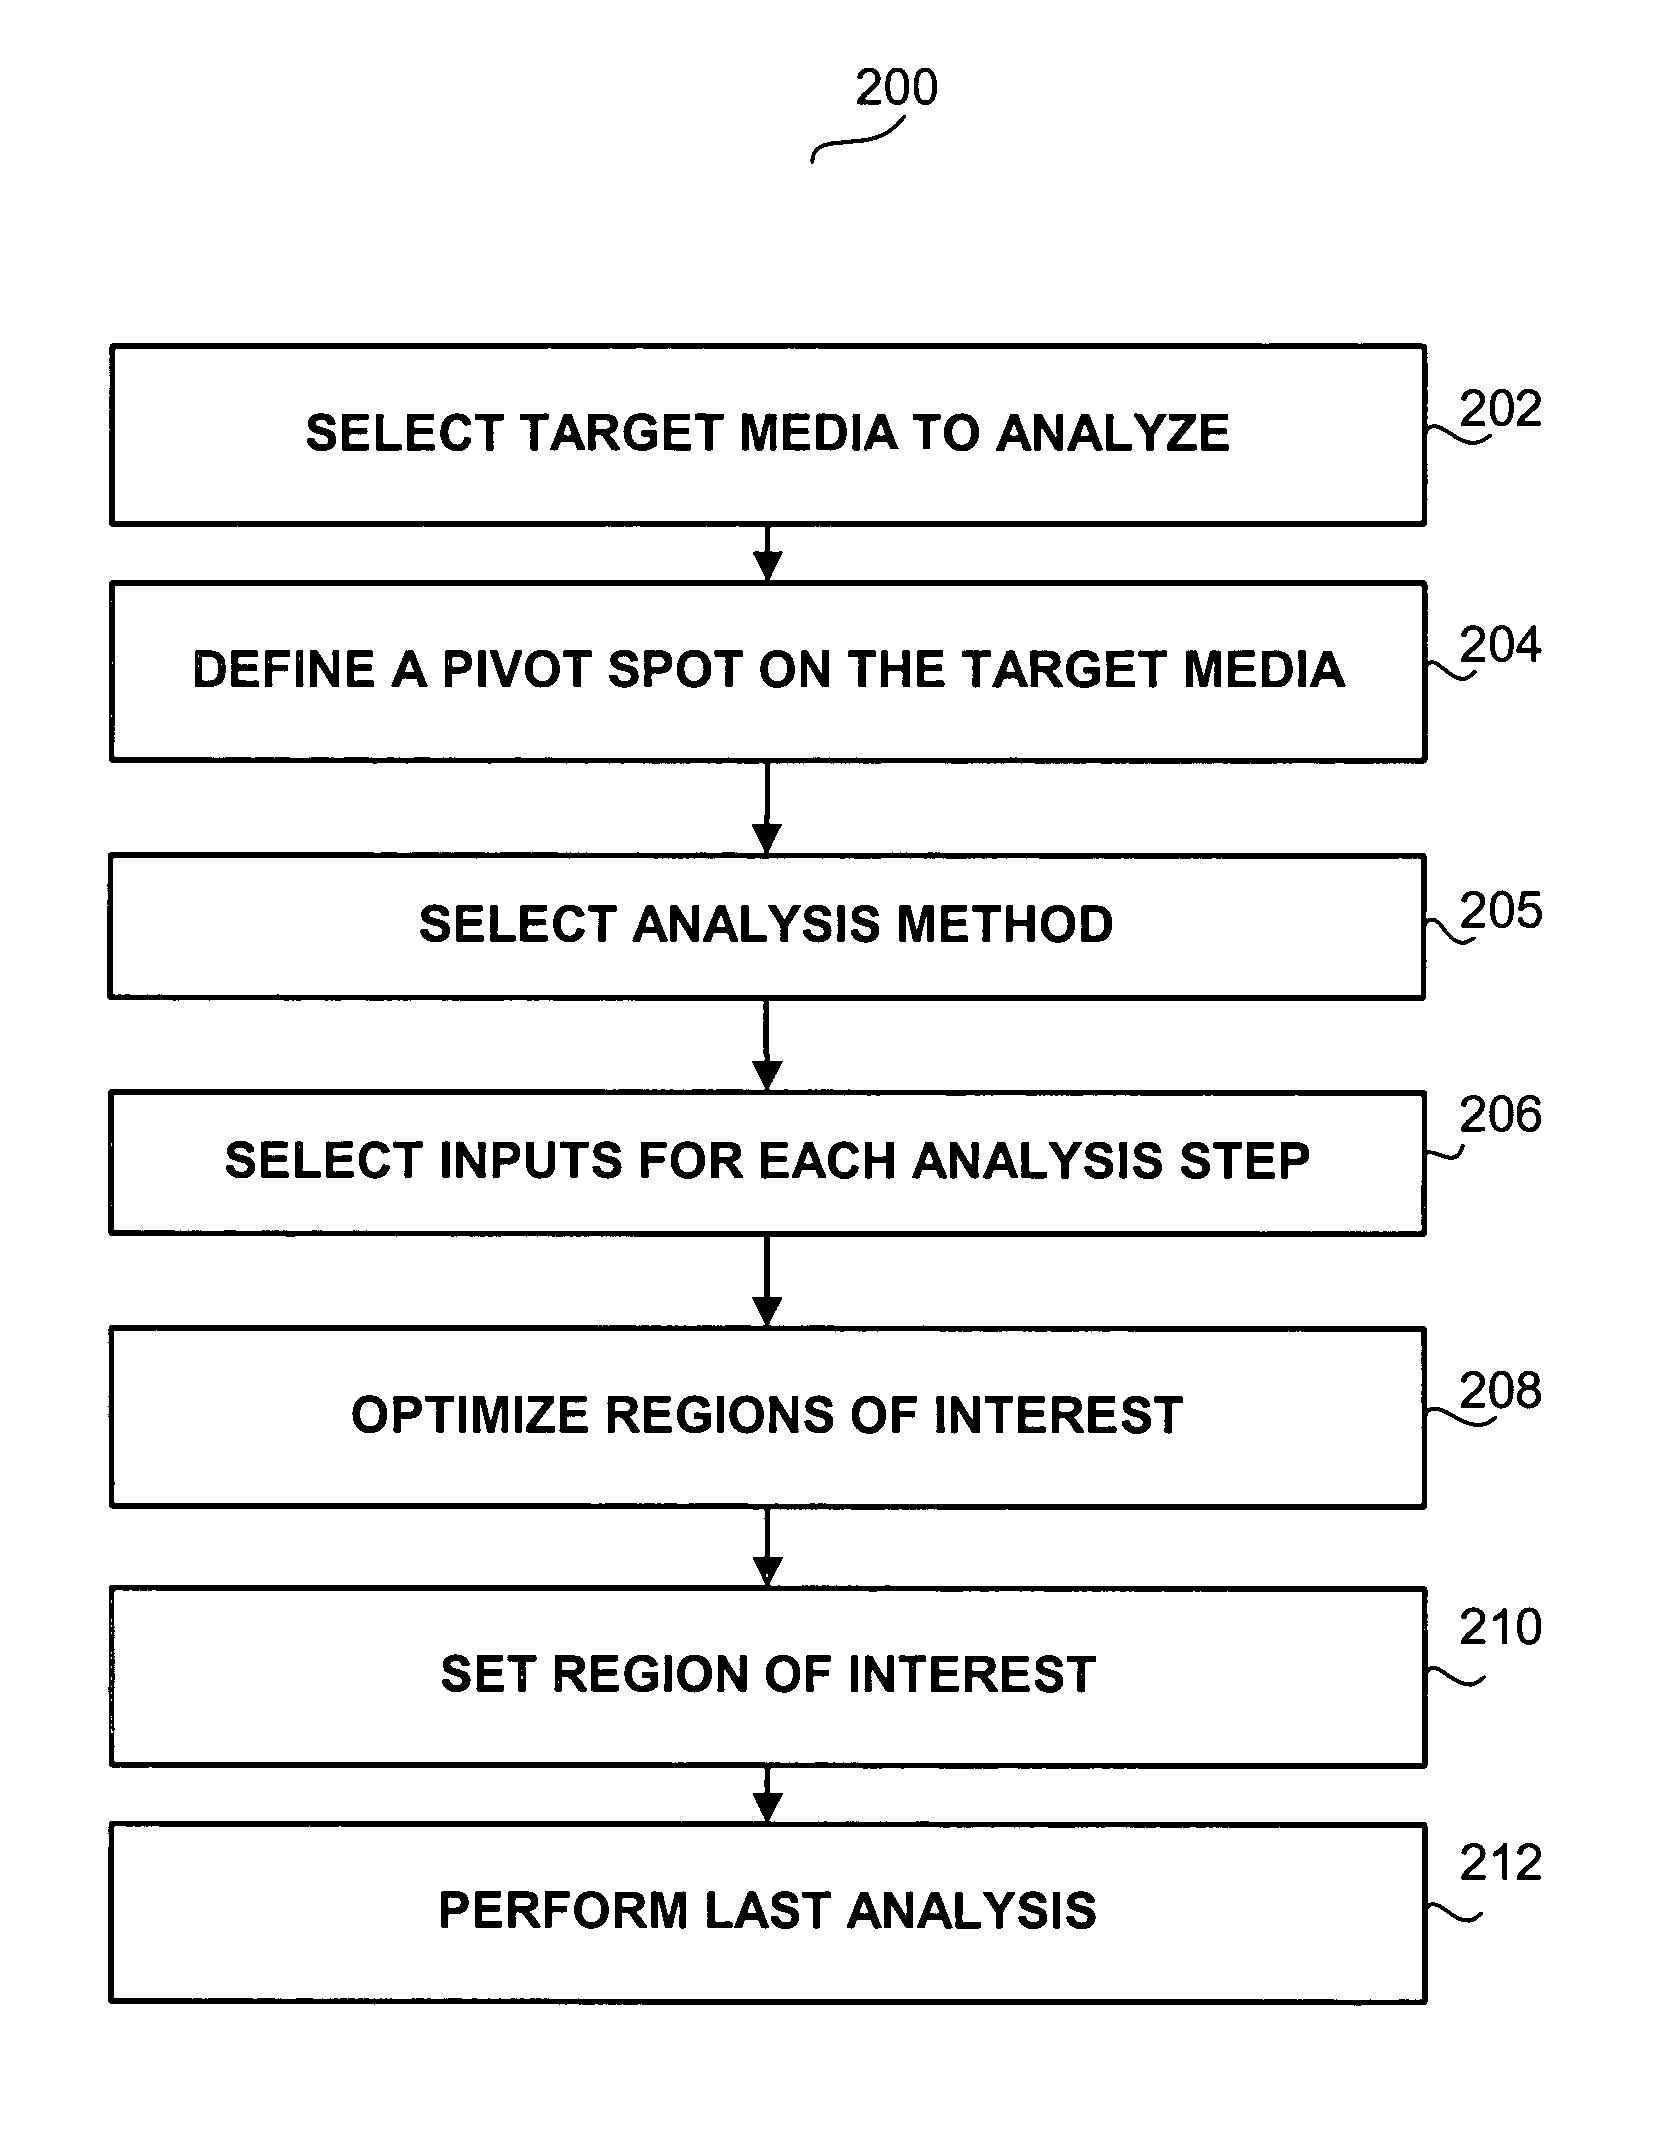 Apparatus and method for event-driven content analysis